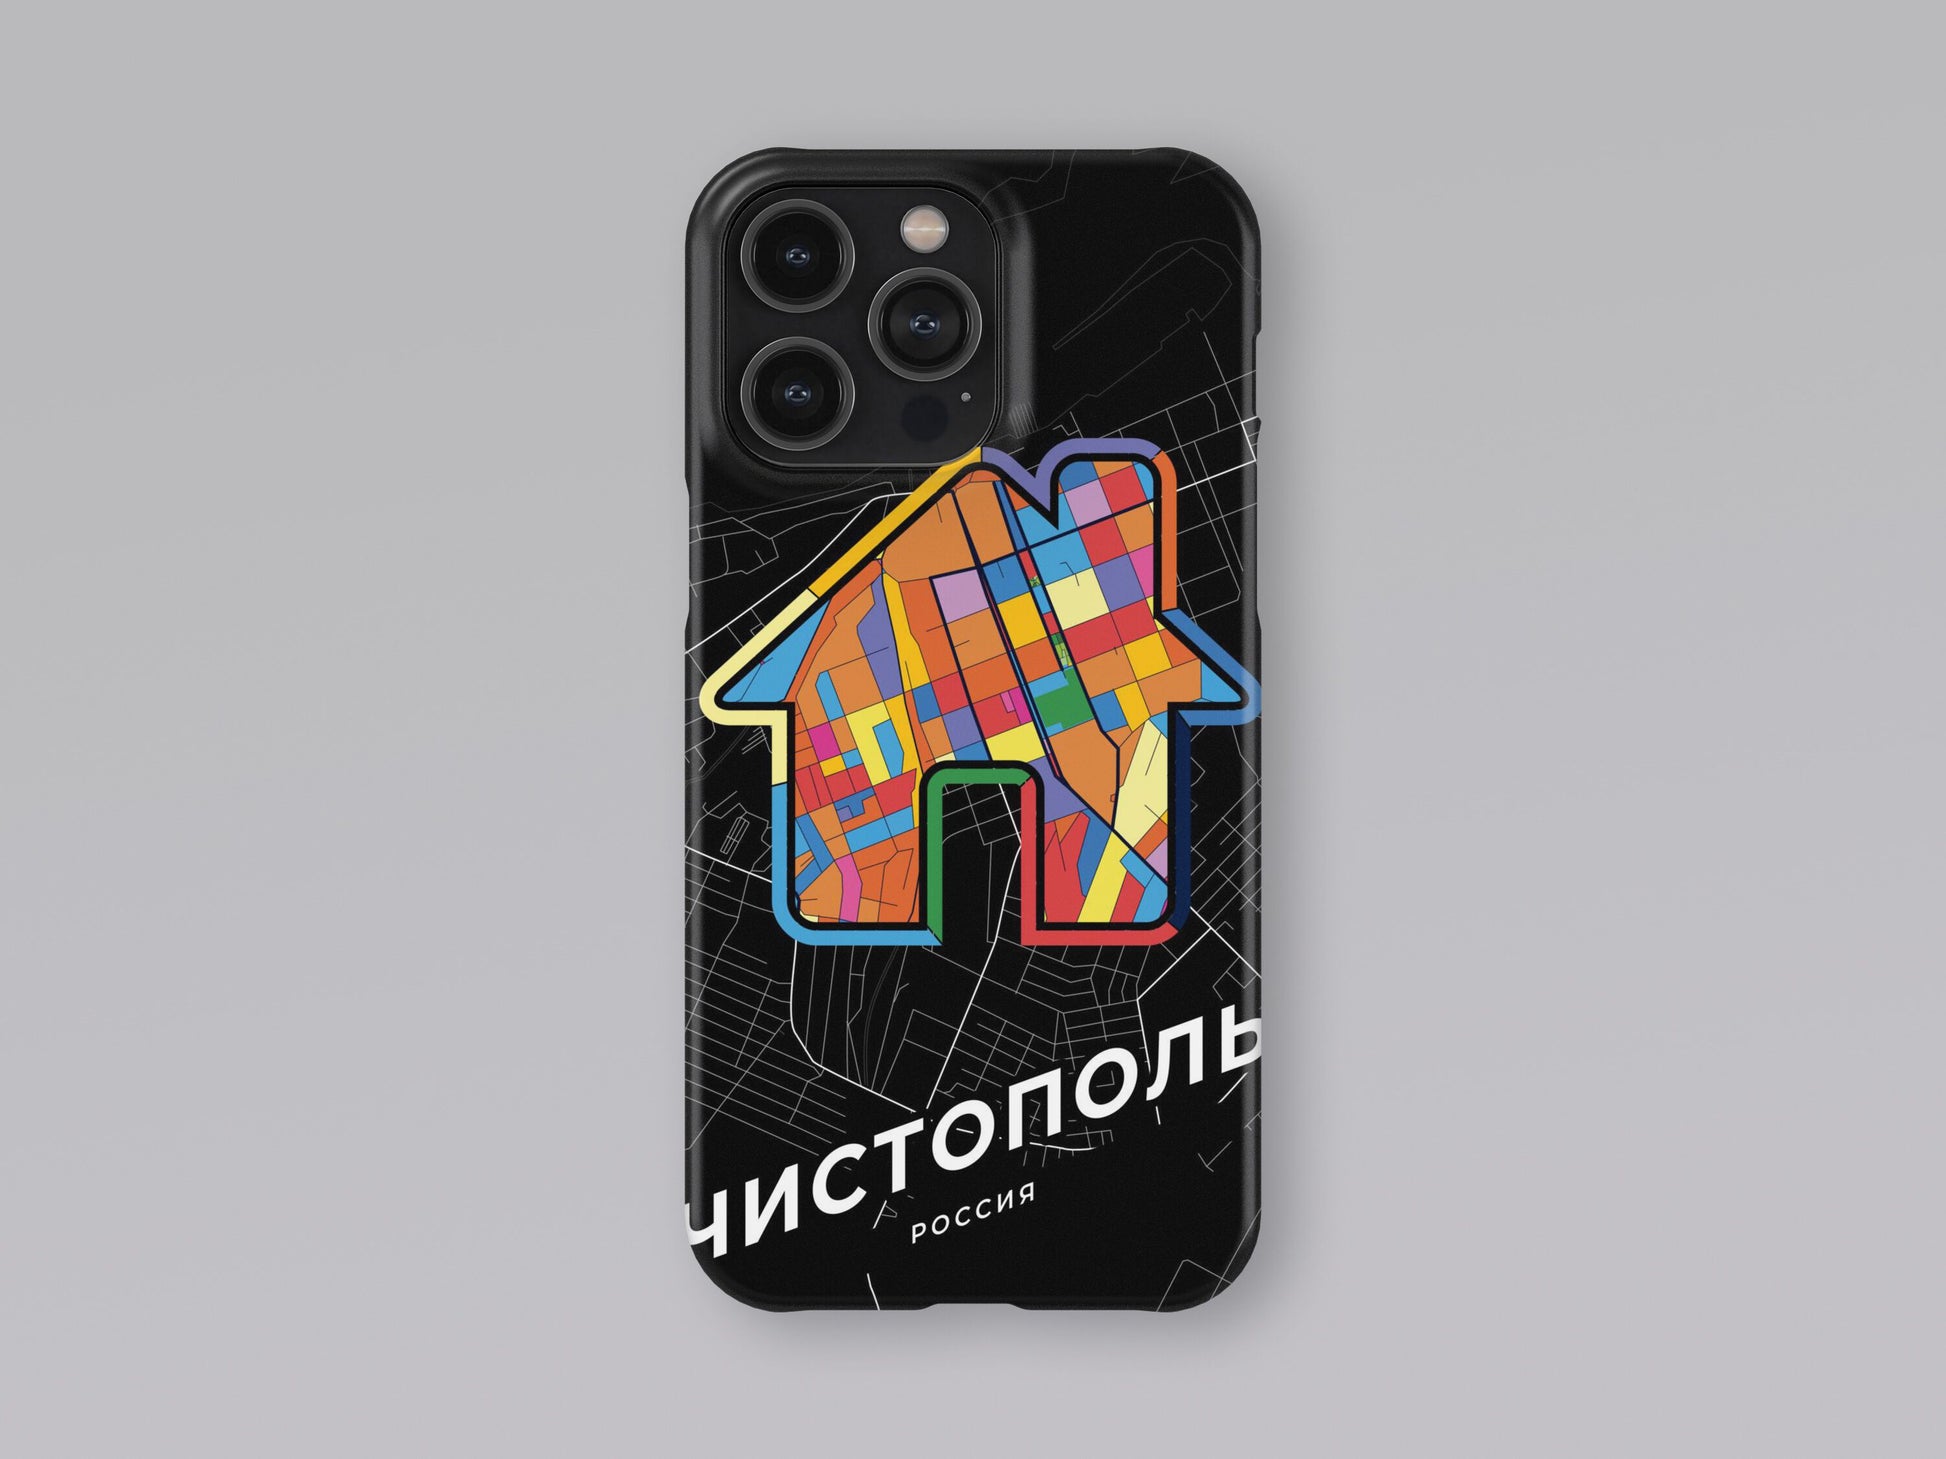 Chistopol Russia slim phone case with colorful icon. Birthday, wedding or housewarming gift. Couple match cases. 3